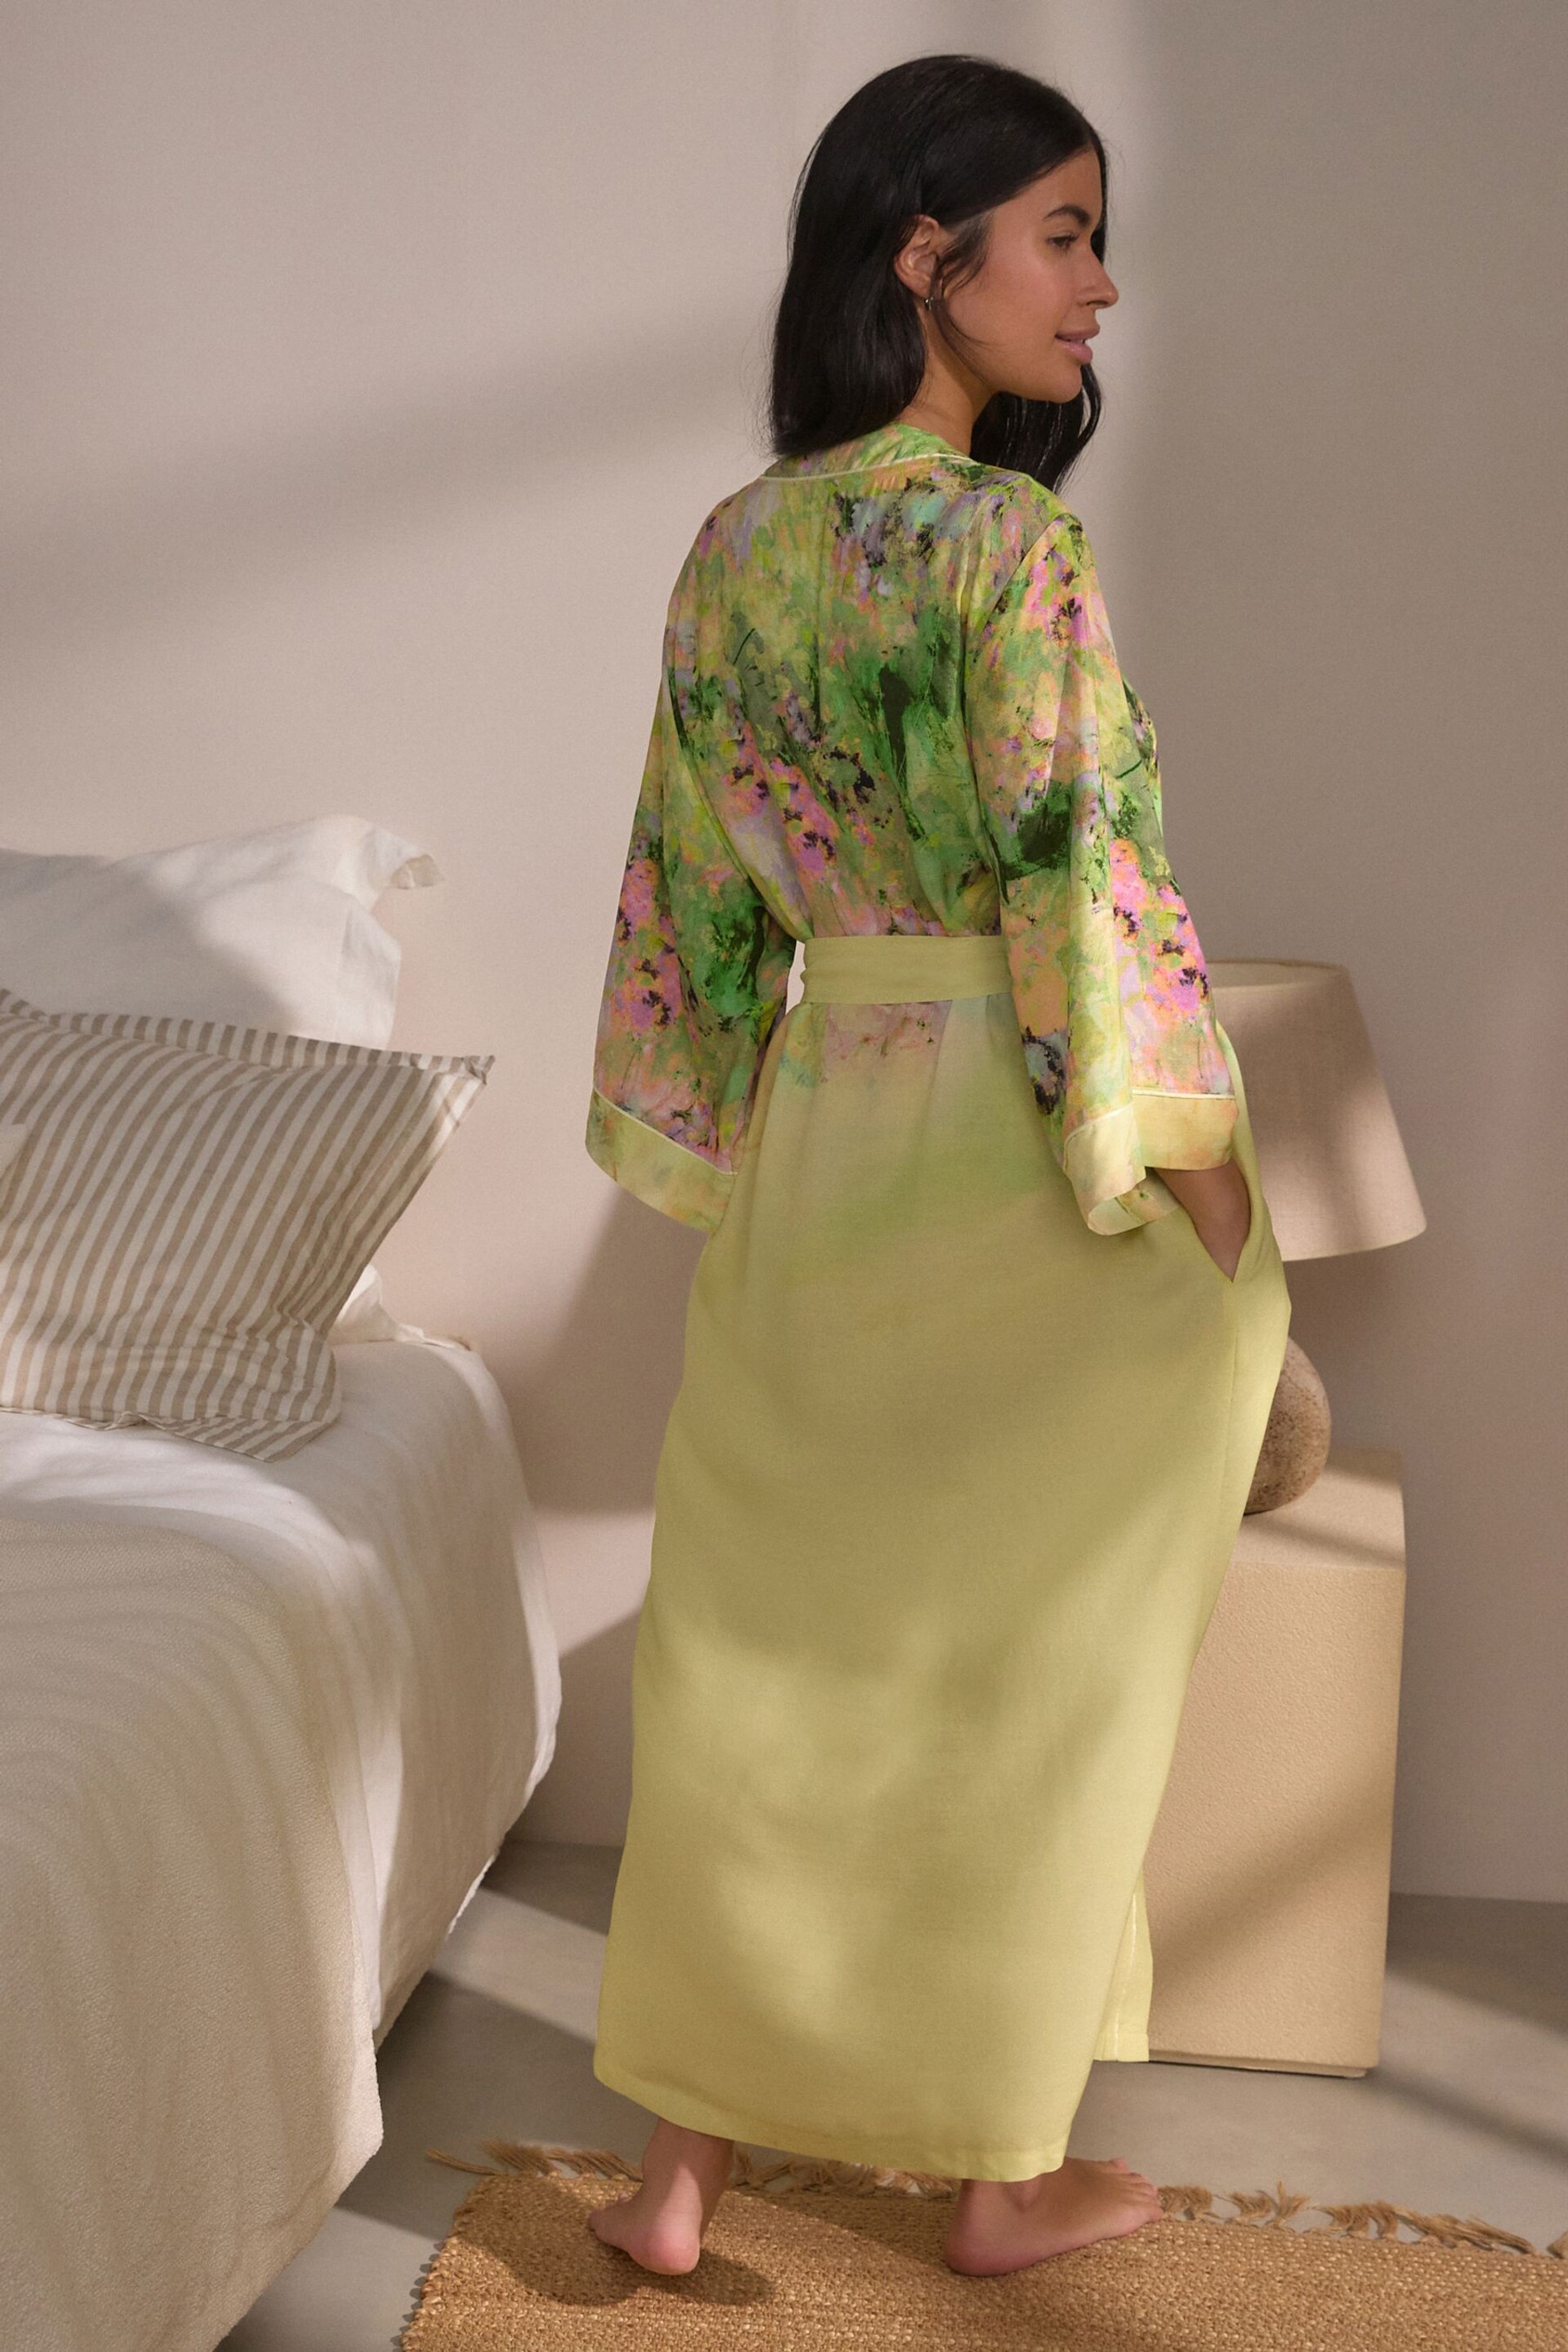 Lime Green Floral Lightweight Robe - Image 4 of 8